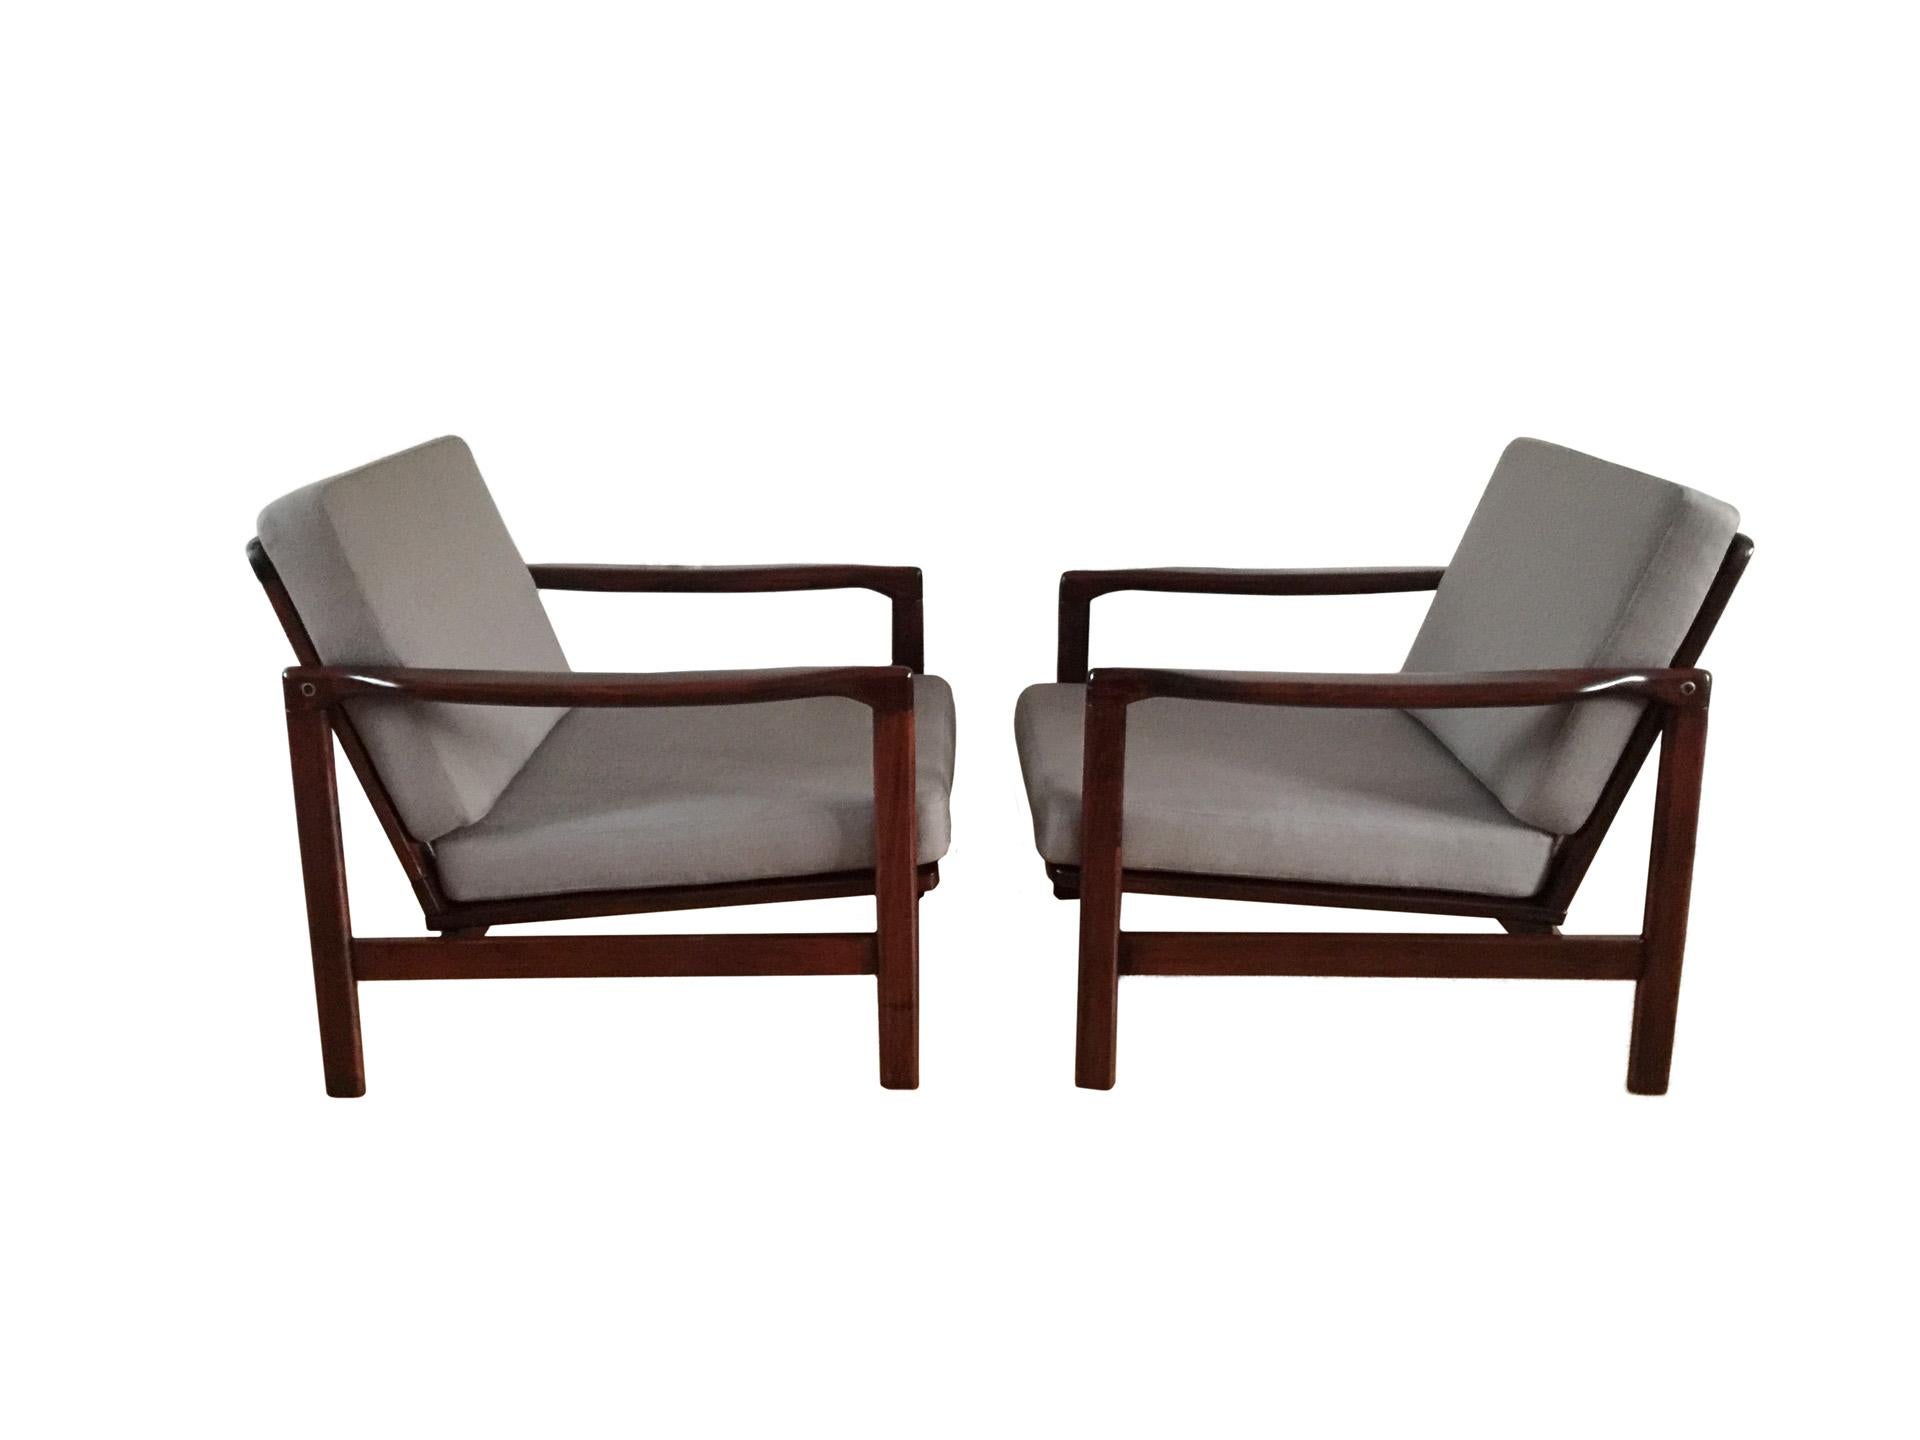 20th Century Midcentury Lounge Armchairs Set in Grey Linen, Zenon Bączyk, 1960s For Sale